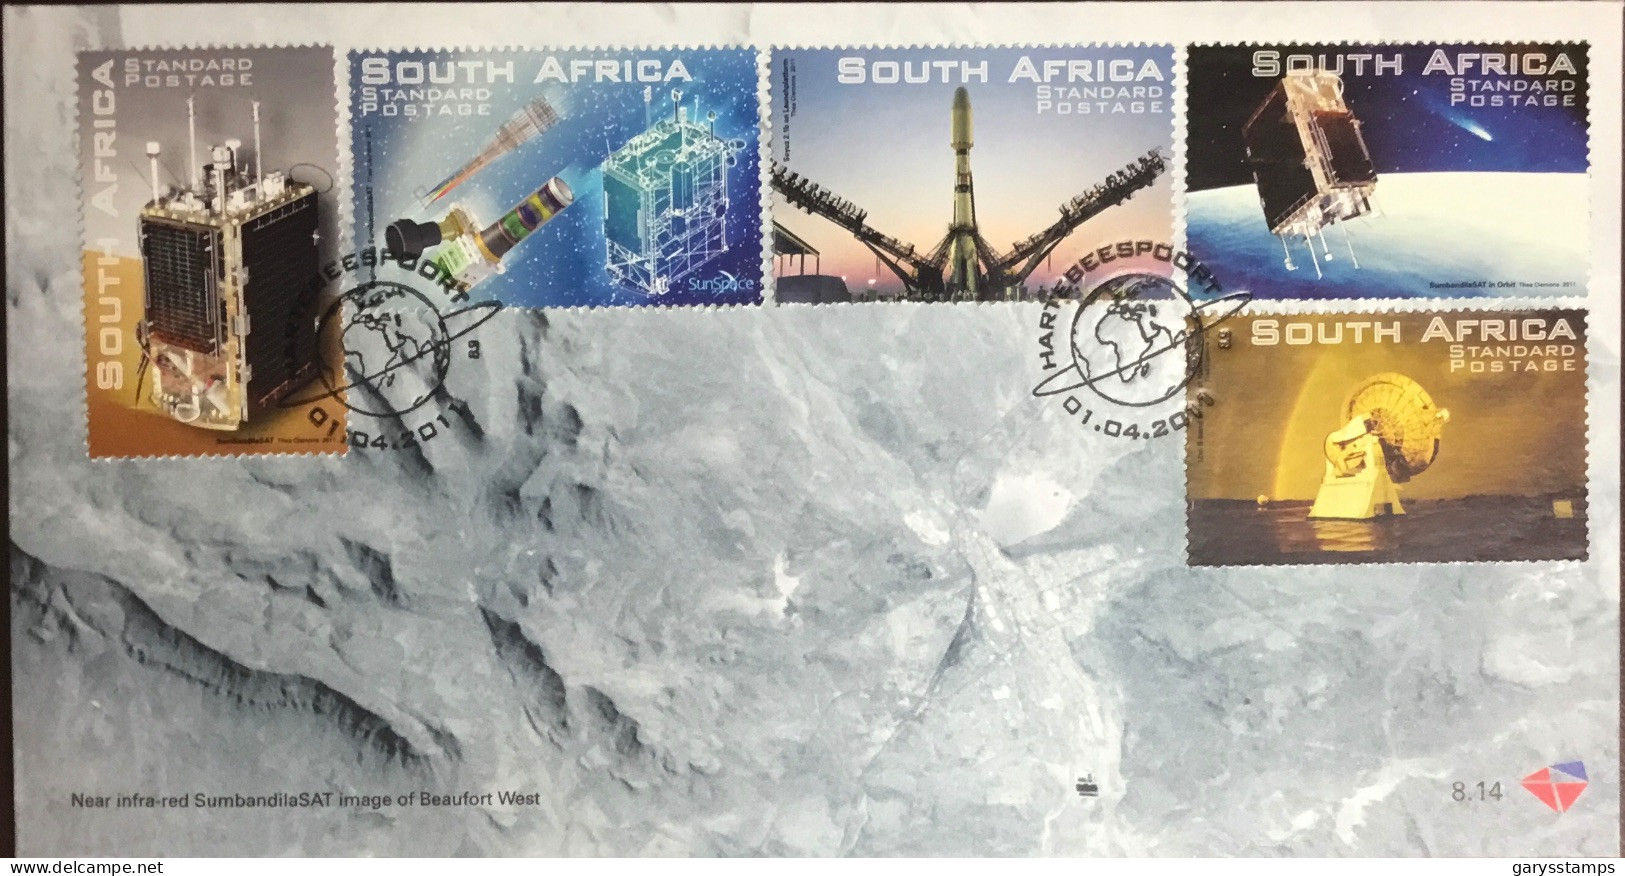 South Africa 2011 Satellite FDC Cover - FDC